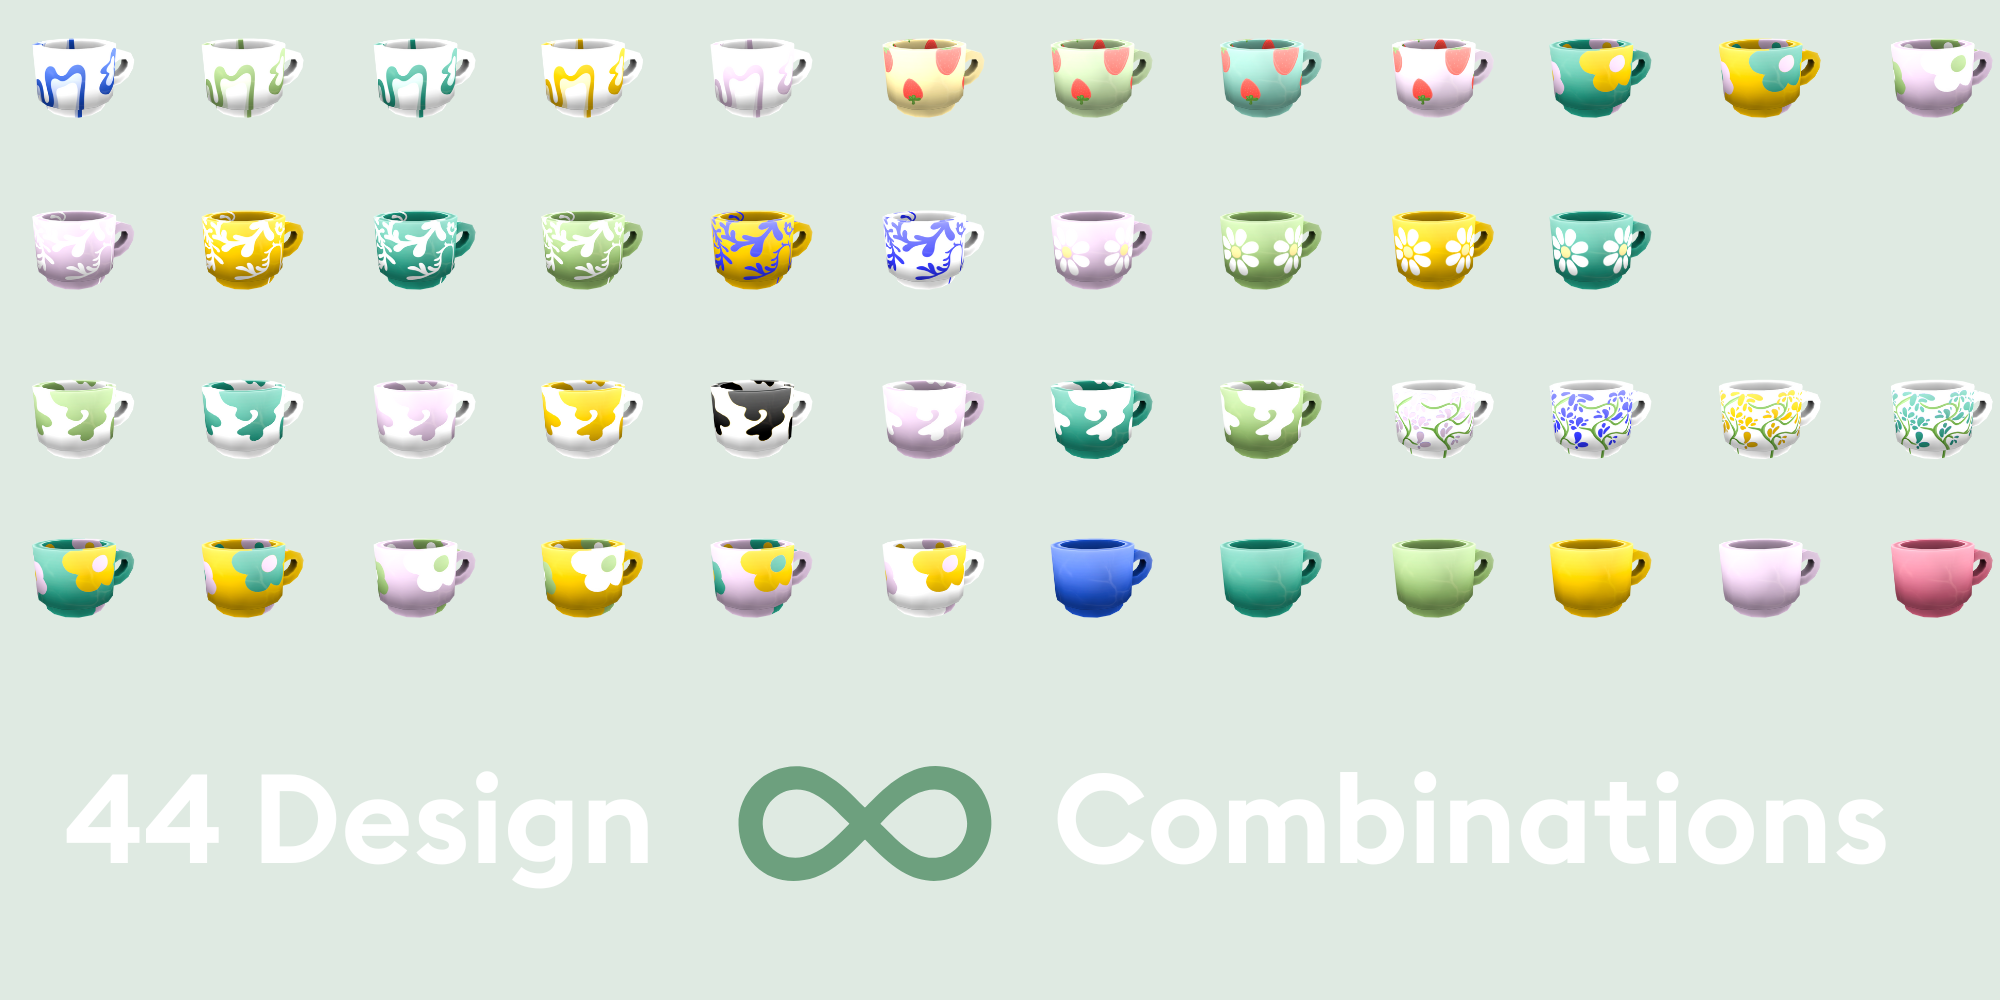 Mix and Match Mugs - Clutter - The Sims 4 Build / Buy - CurseForge